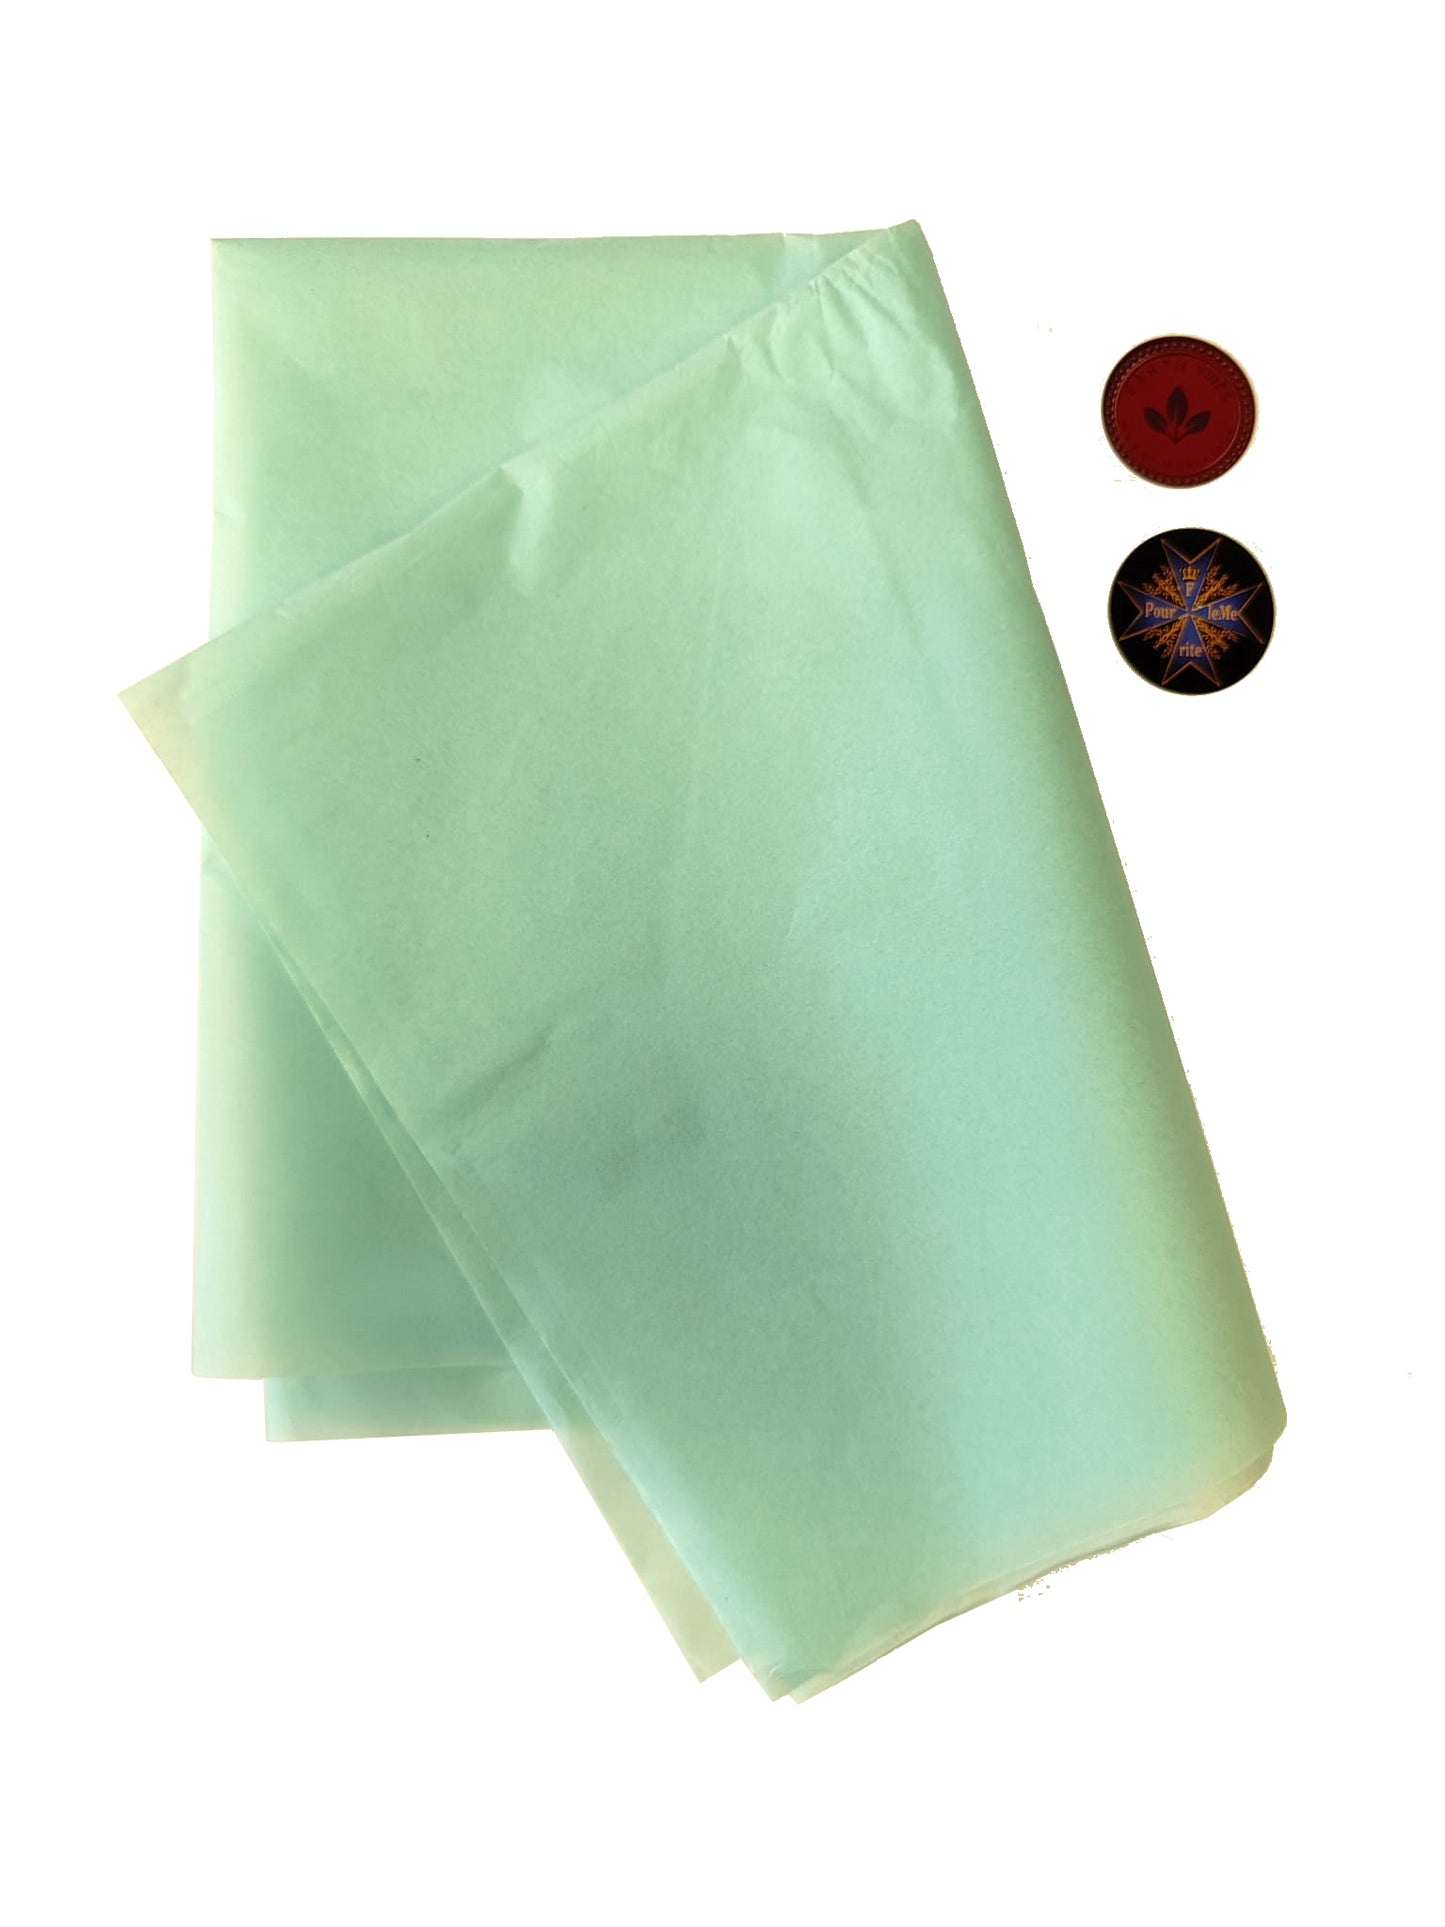 Hensons Standard none dope Free Flight Tissue Covering - 3 pack